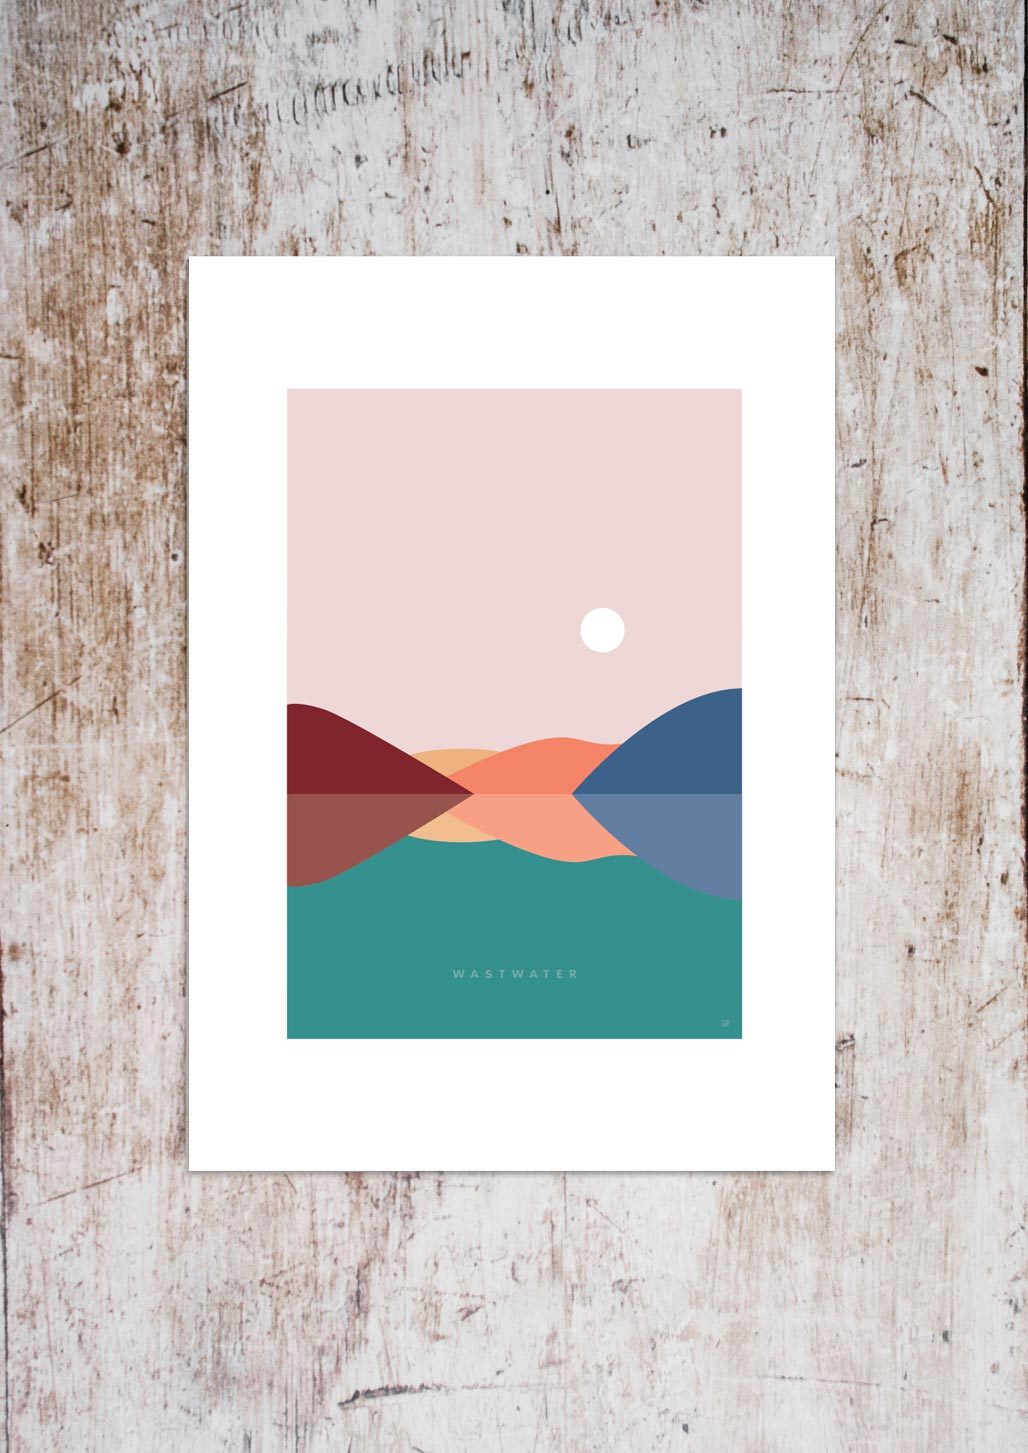 A3 print of wastwater